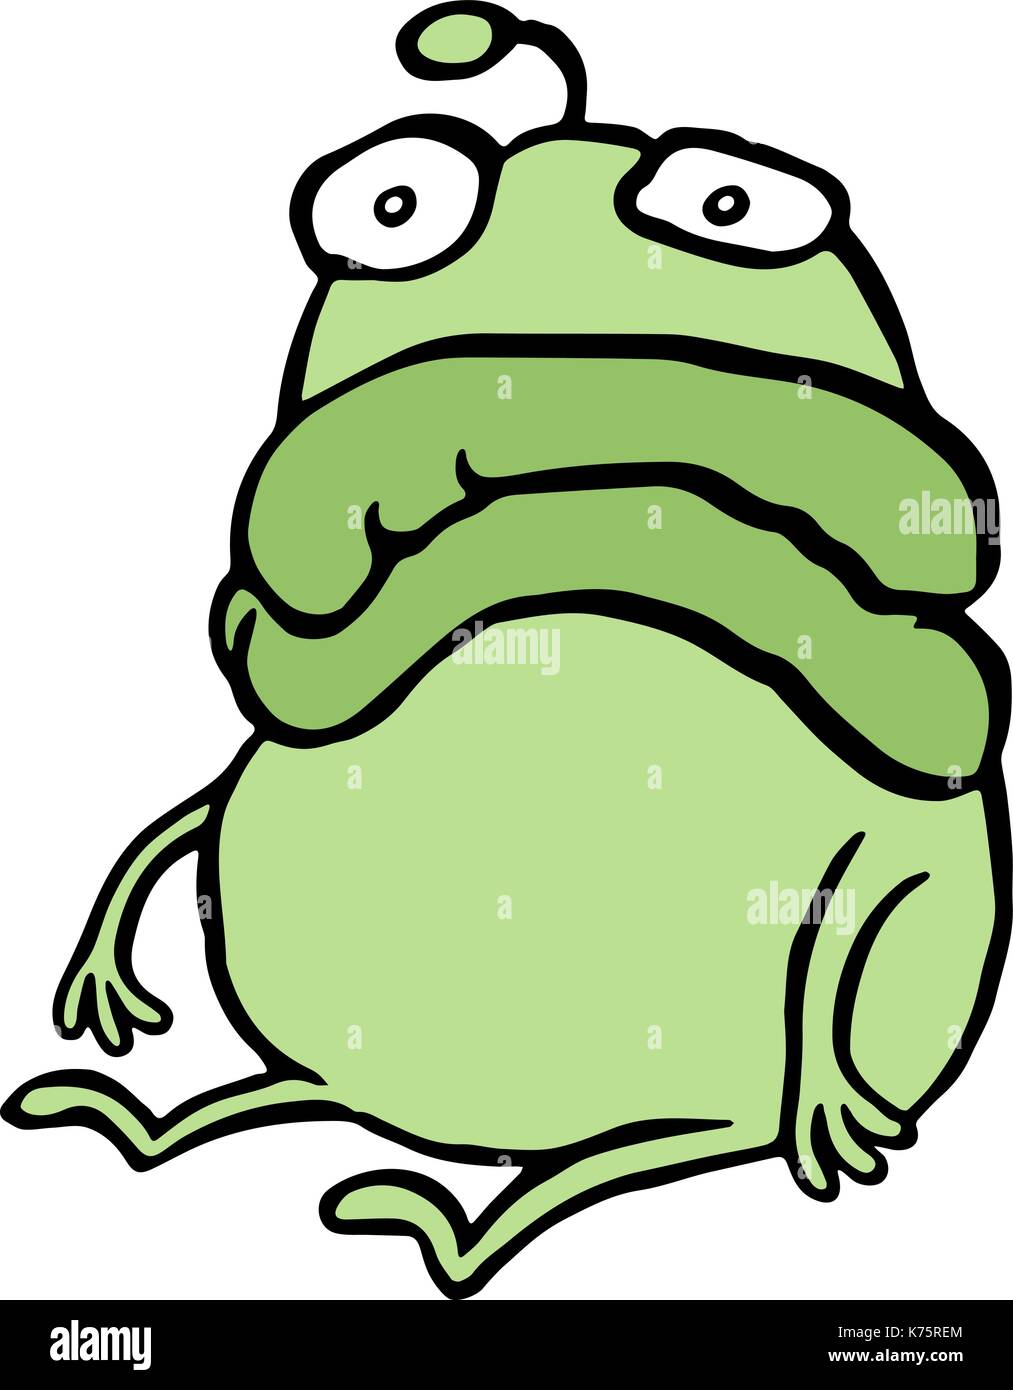 A sad alien sits alone. Bad mood. Loneliness and sadness. Cute cartoon character. Vector illustration. Stock Vector